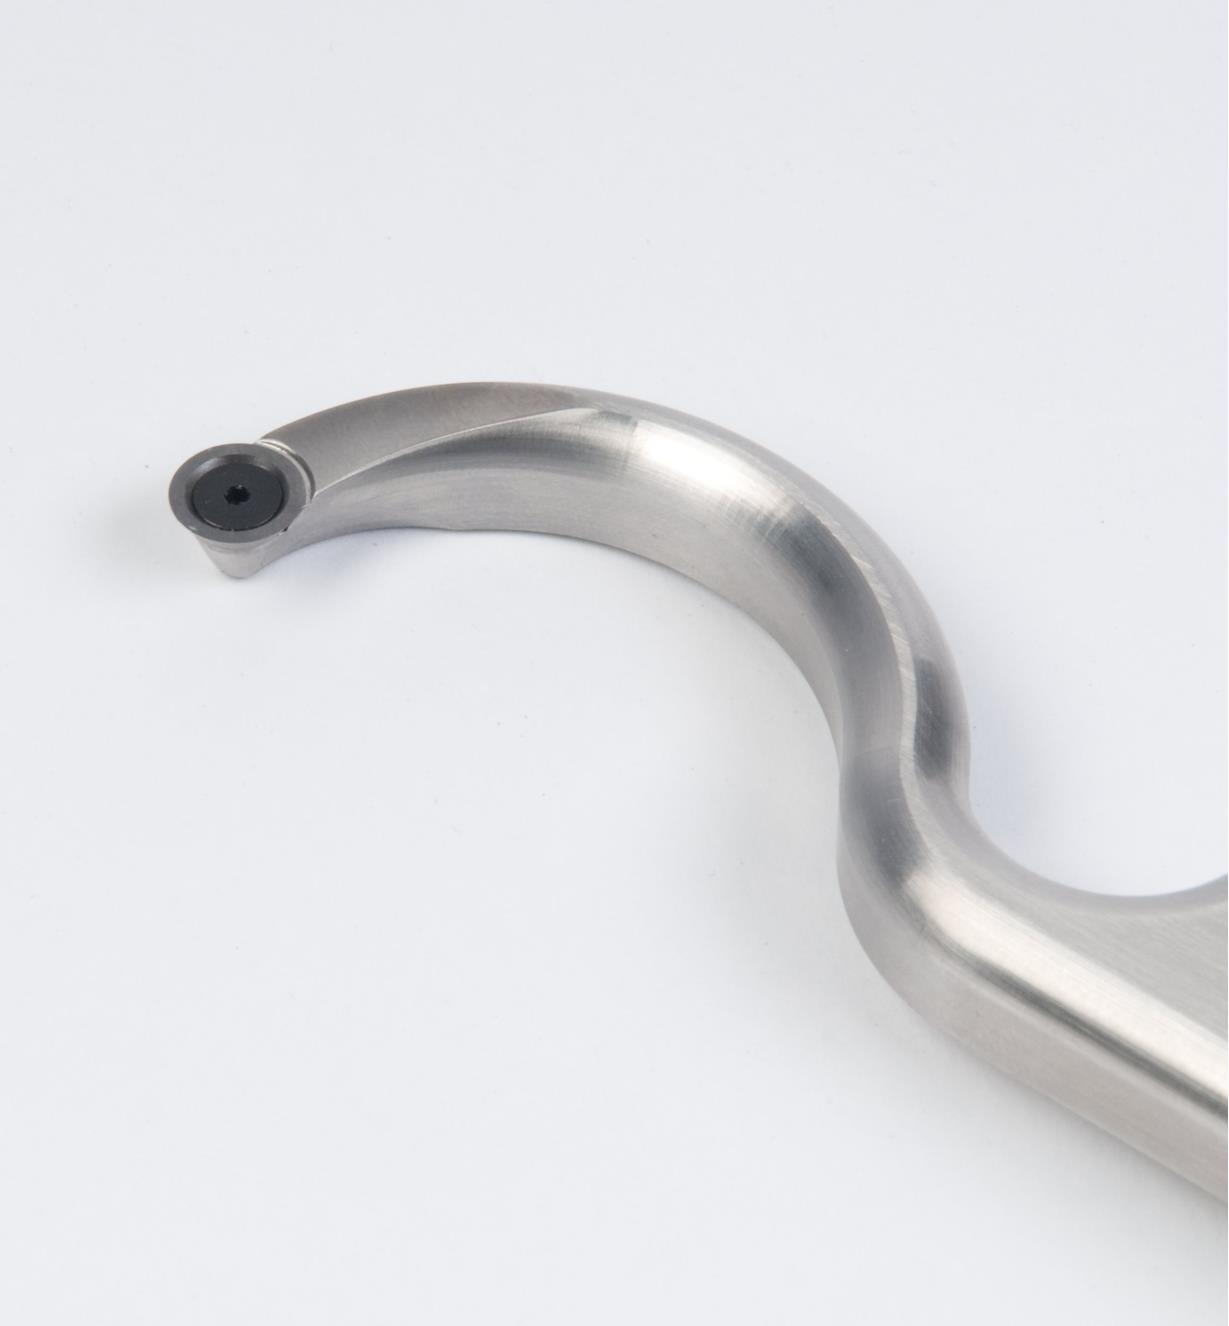 Close-up of #3 Acute Curve Mid-Size Easy Hollower tip